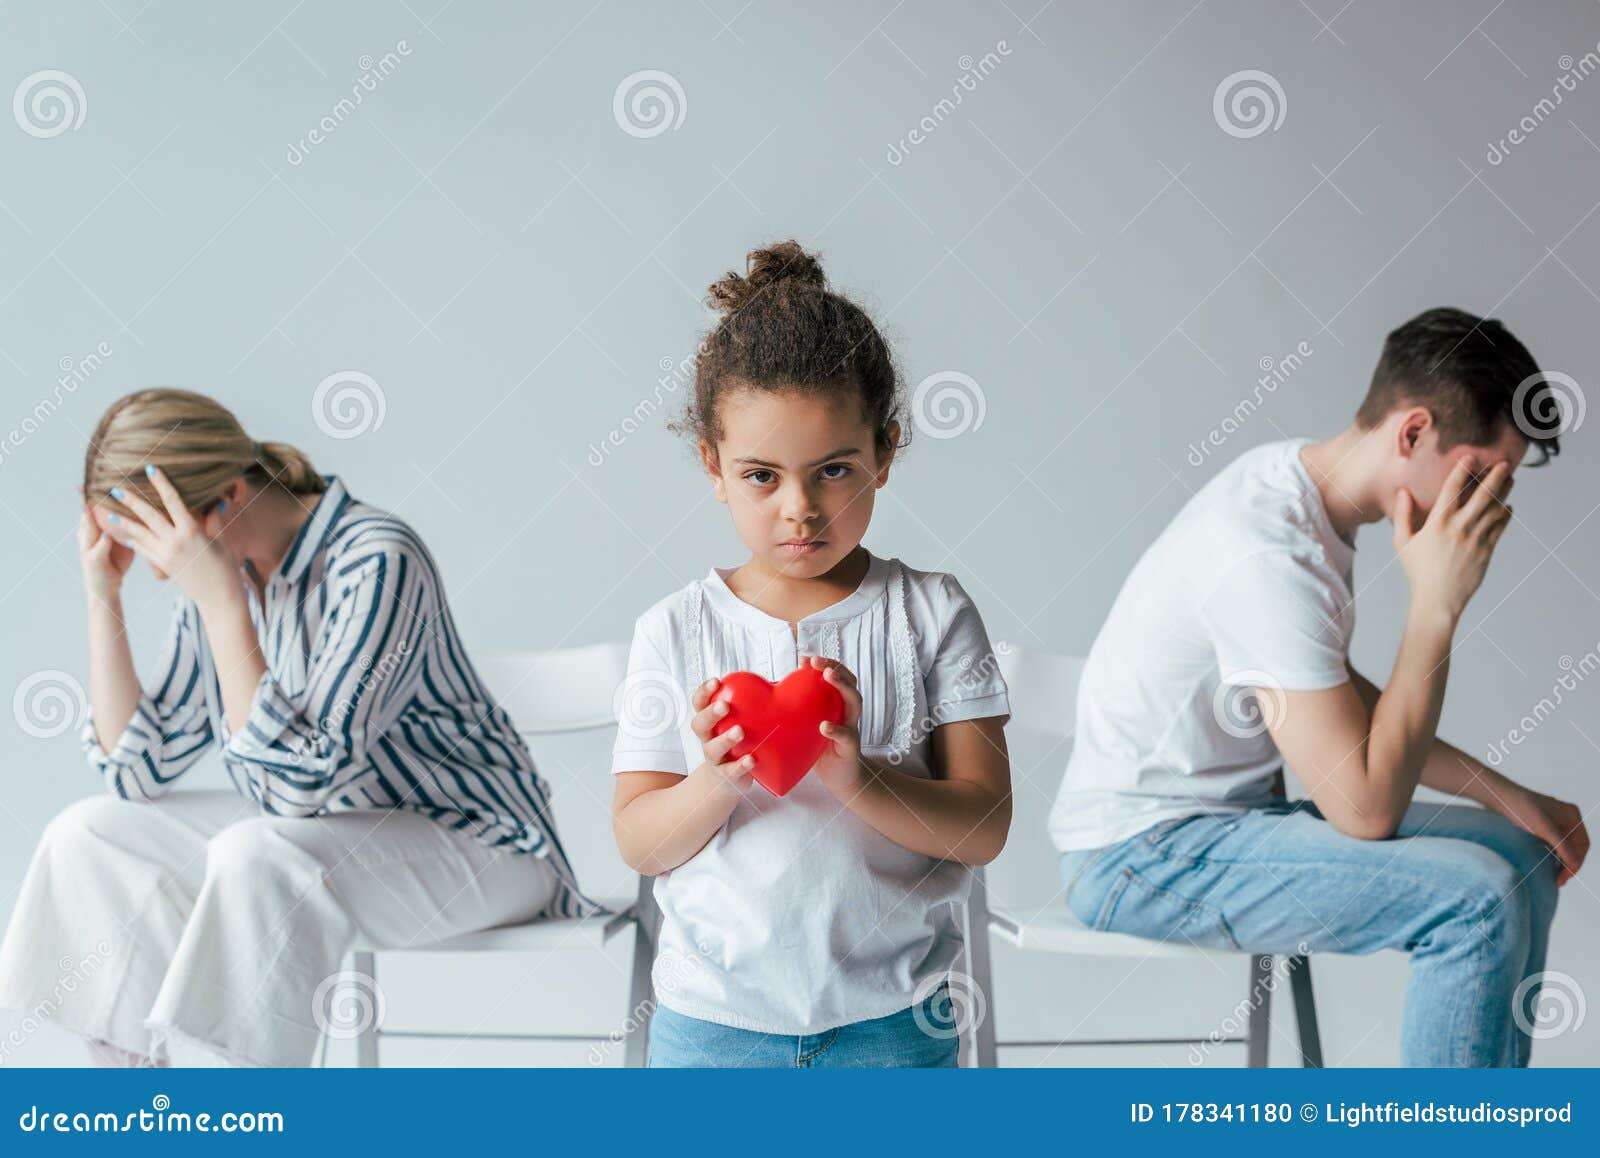 focus of adopted african american kid holding red heart near divorced foster parents on grey